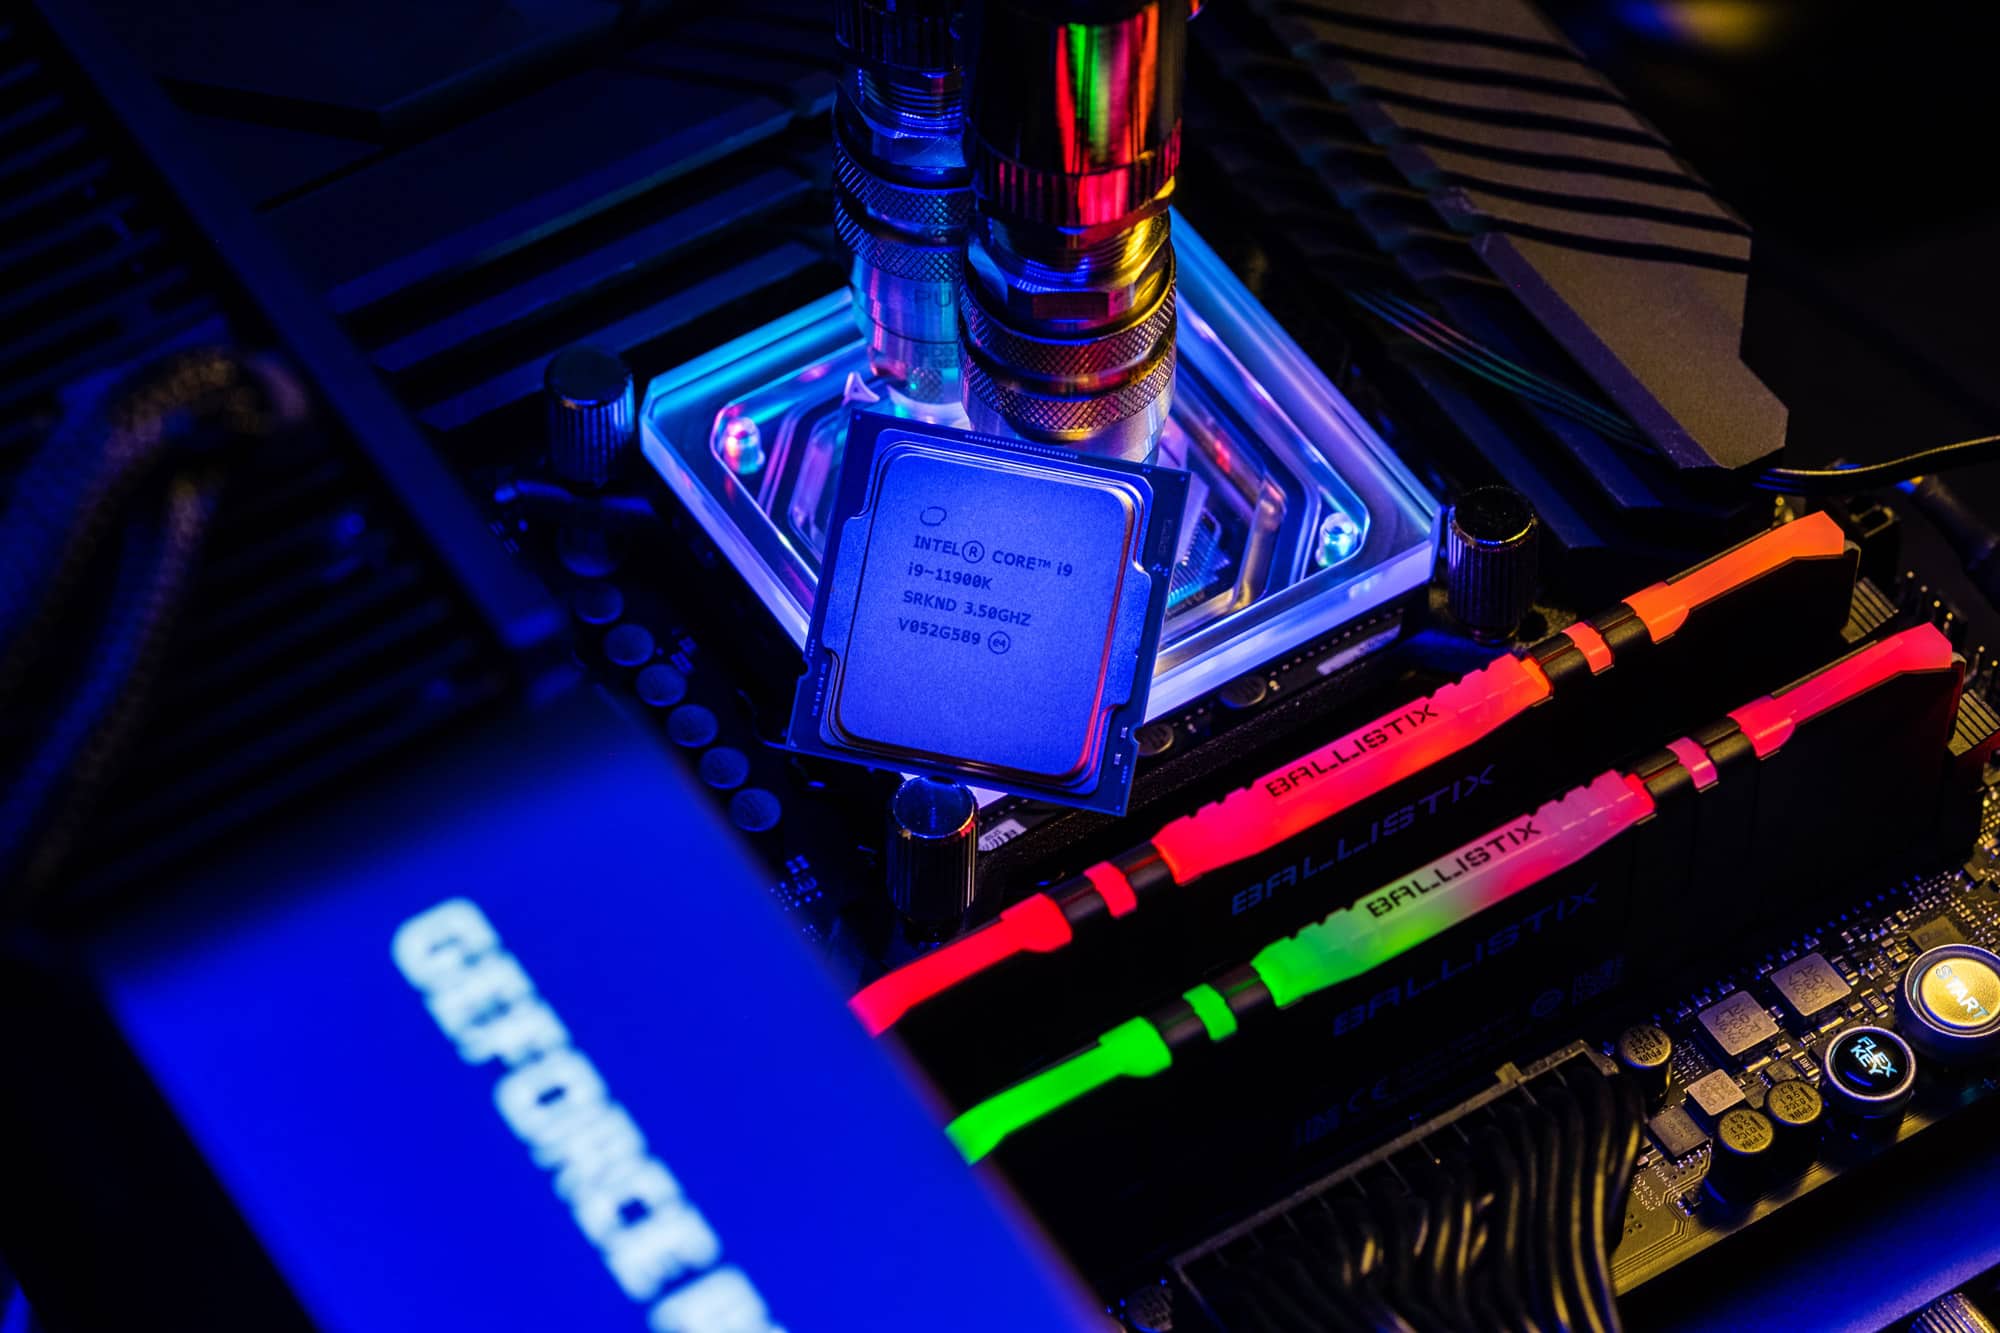 LGA 1200 vs LGA 1700: Which Socket Is Right for You?